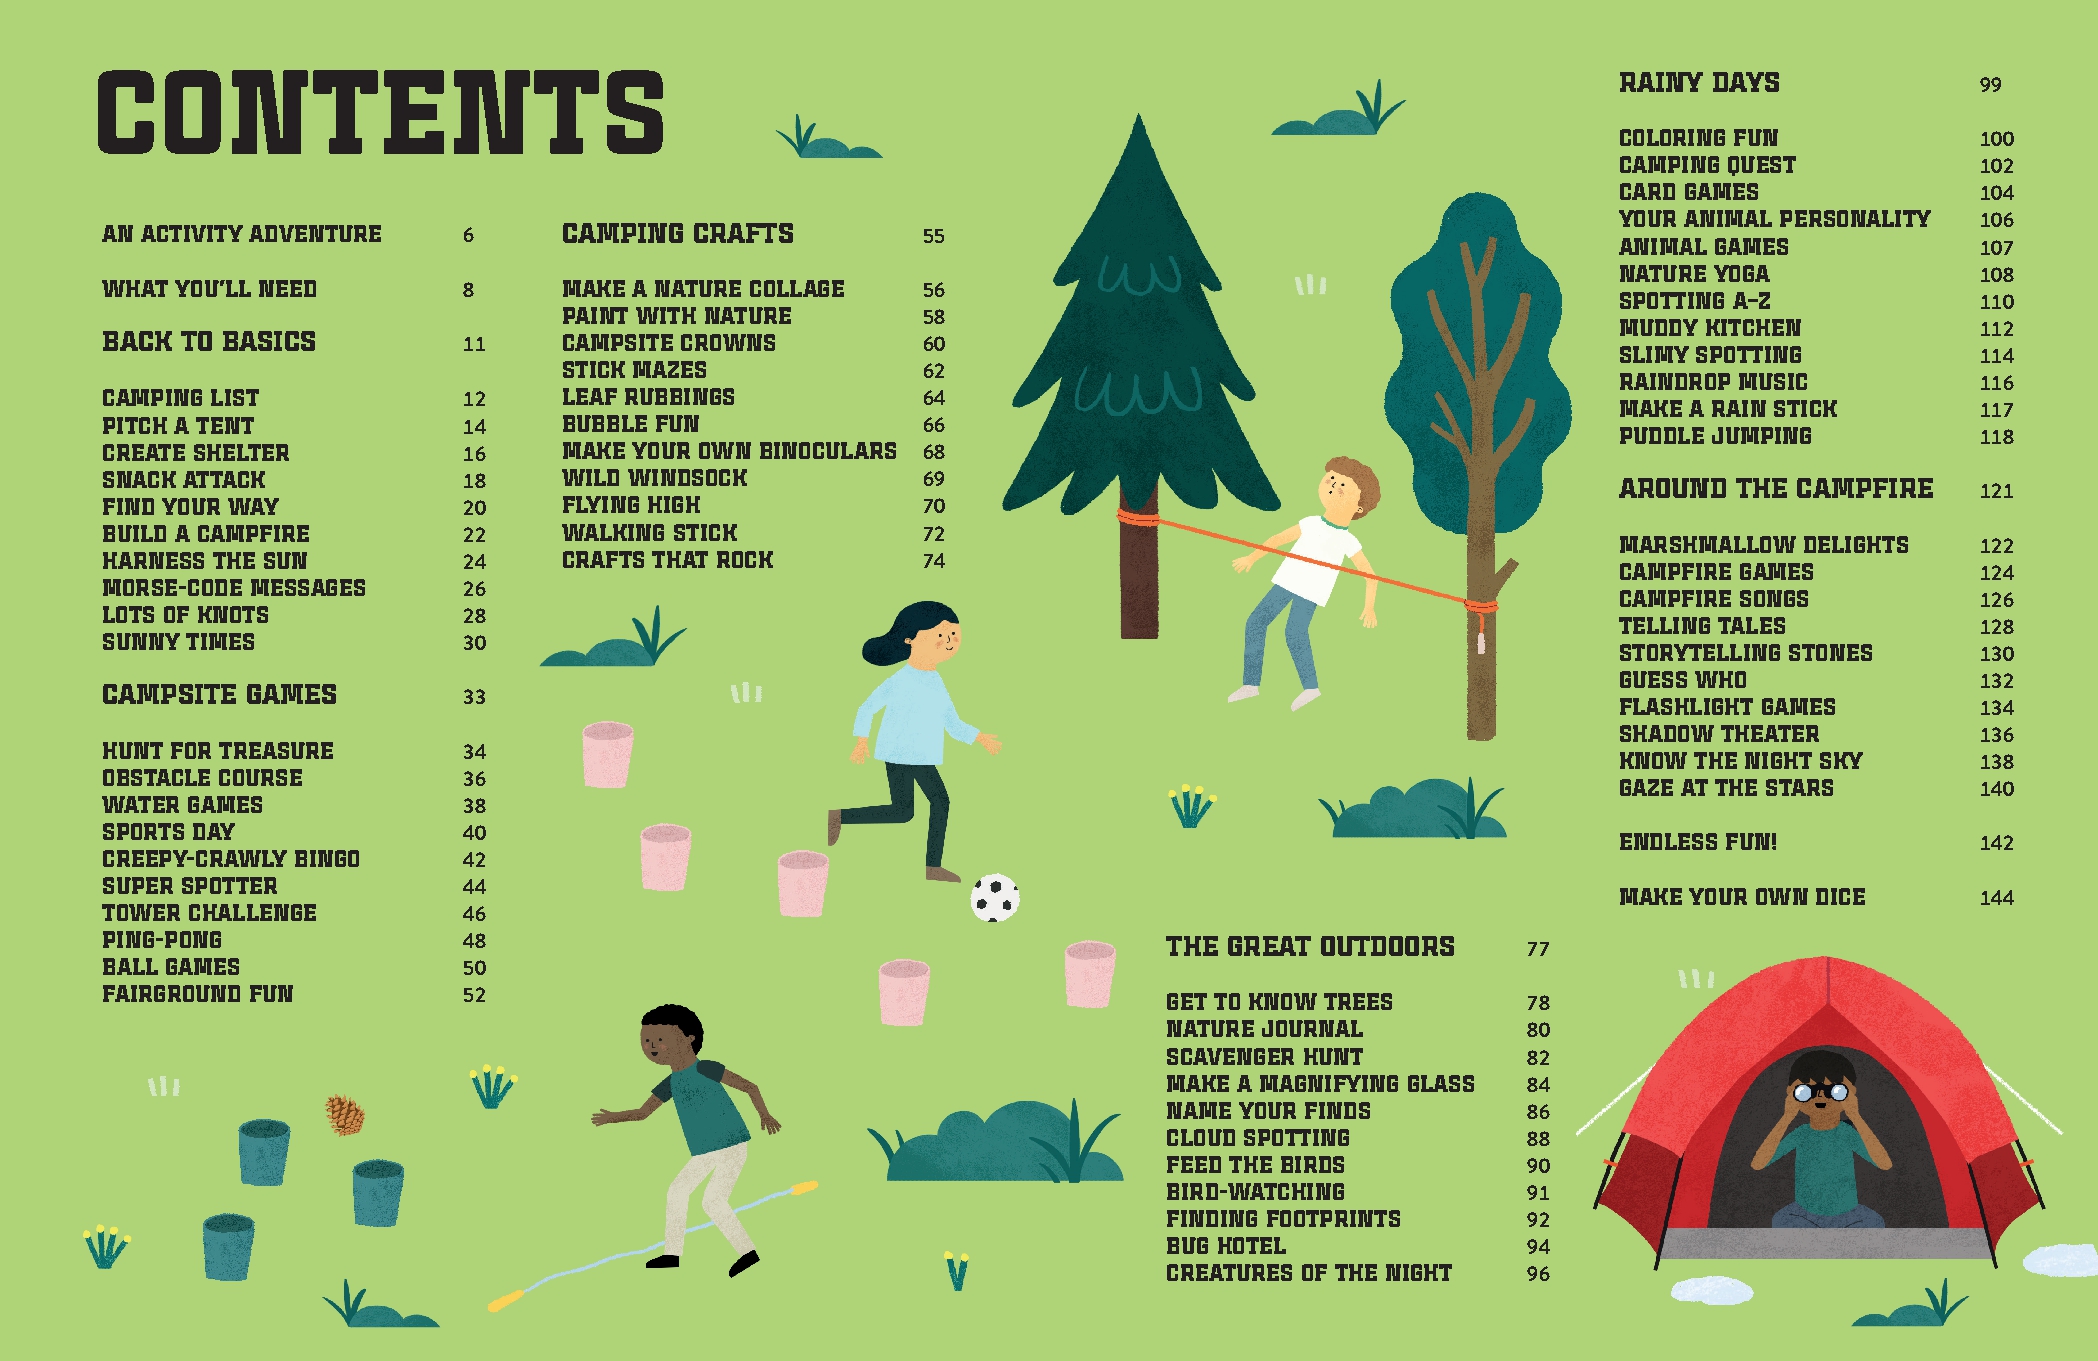 Create Your Own Camping Activities 1